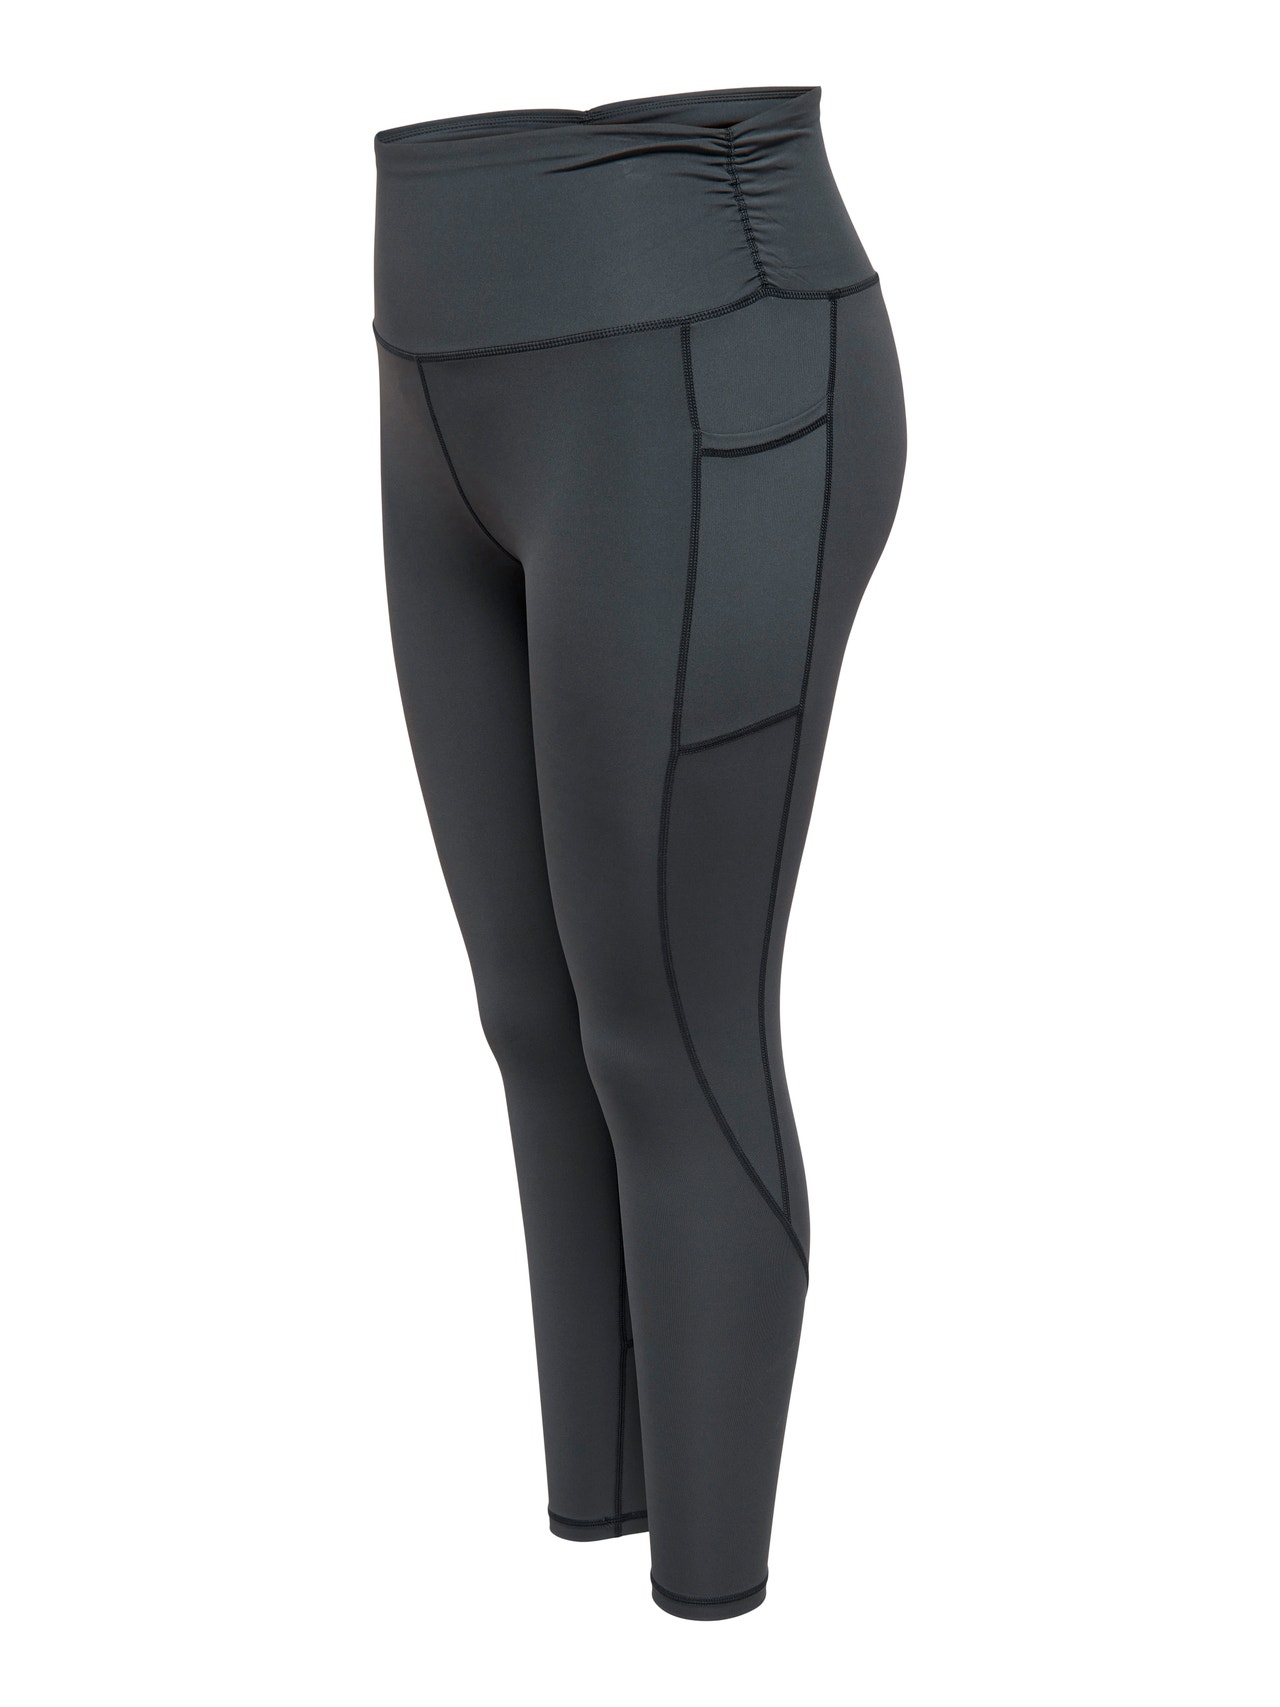 ONLY Tight fit High waist Curve Legging -Nine Iron - 15262812